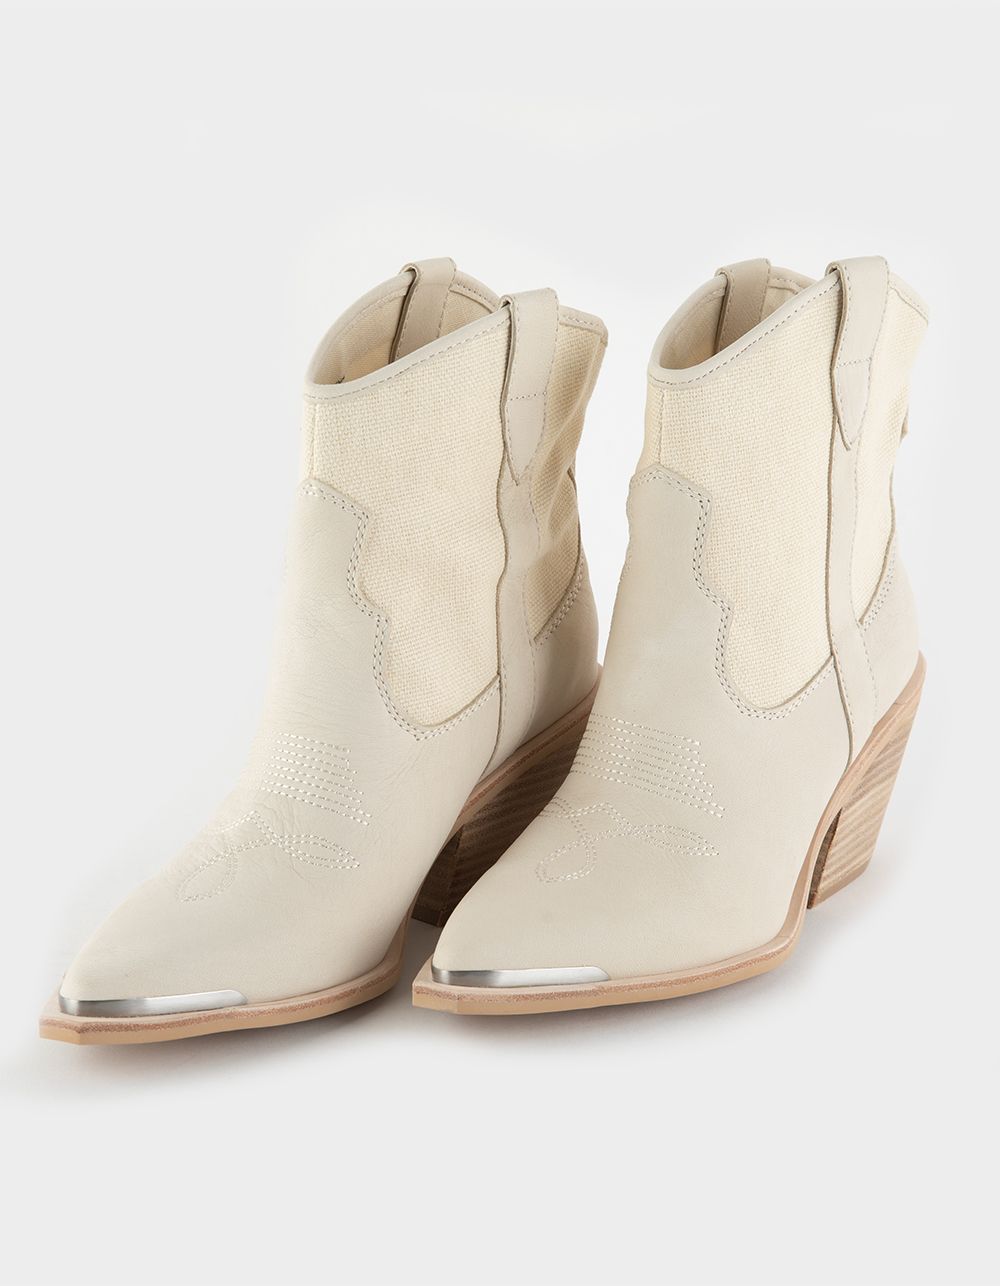 DOLCE VITA Nashe Womens Western Booties | Tillys